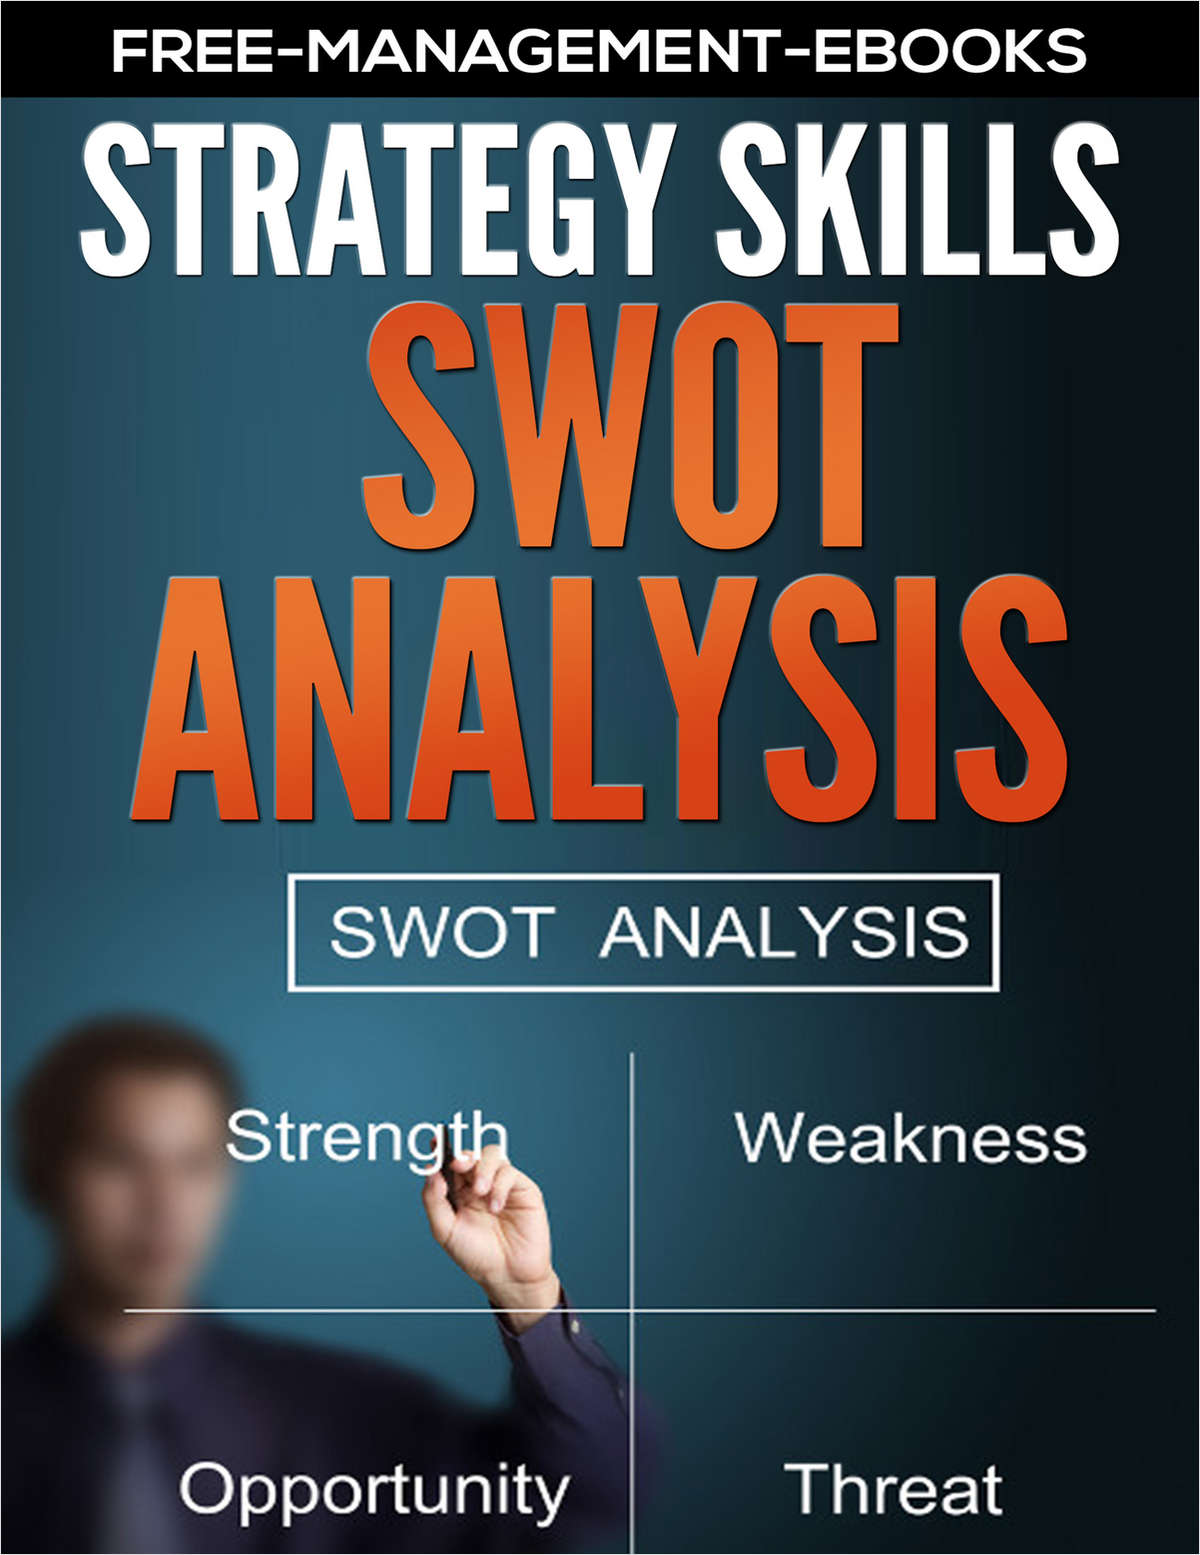 SWOT Analysis -- Developing Your Strategy Skills